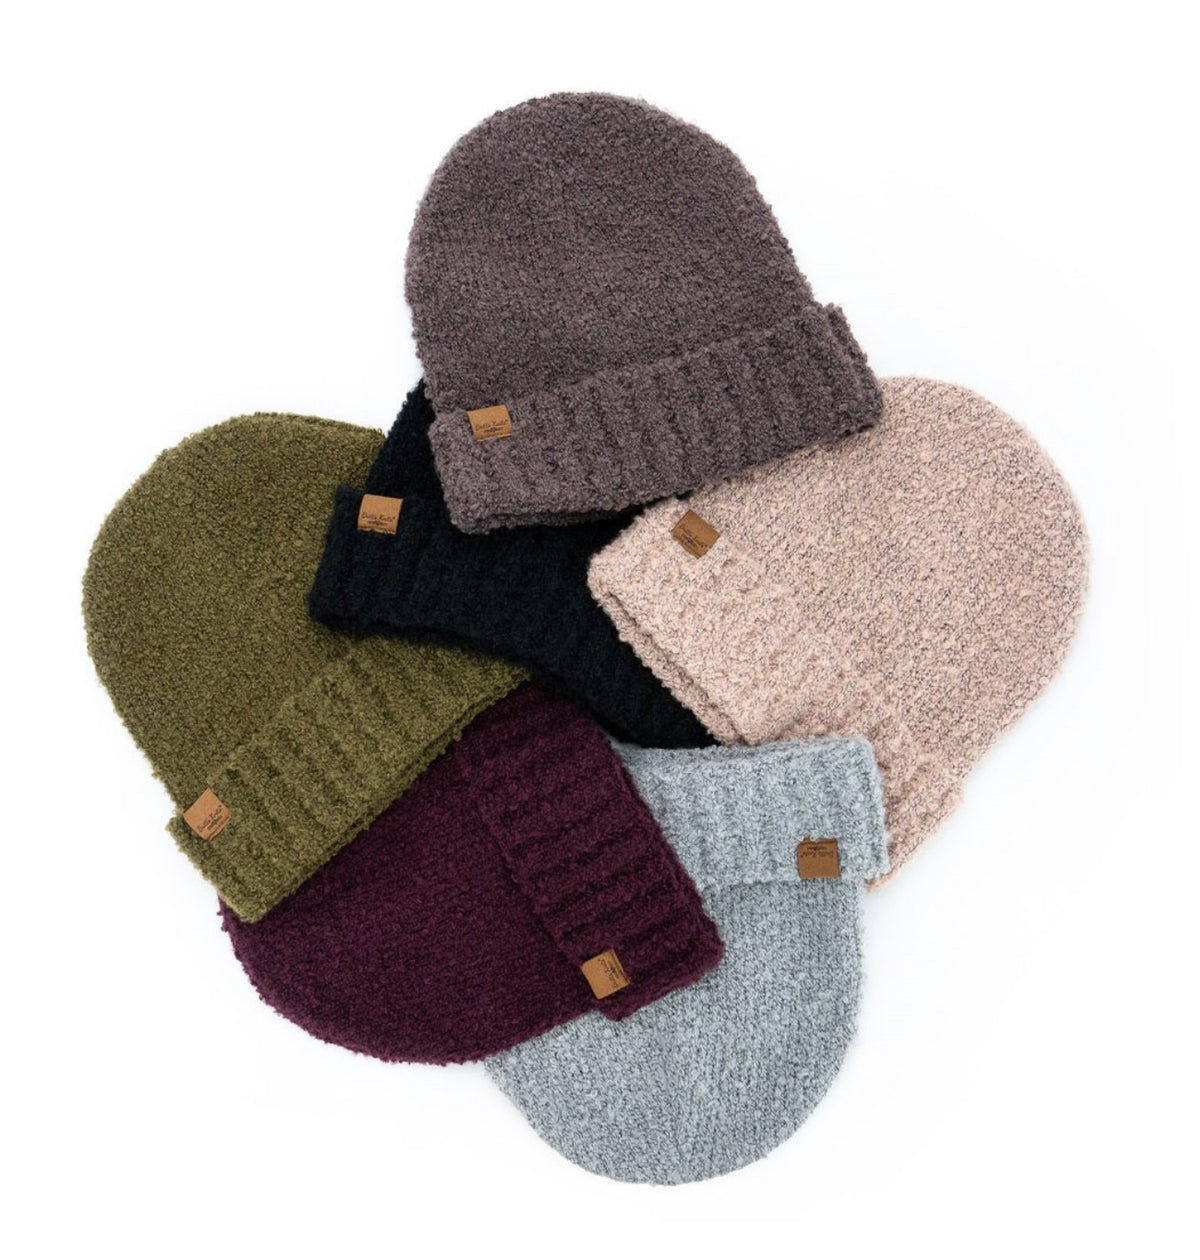 Britts Knits Common Good Beanie Hat - Gray